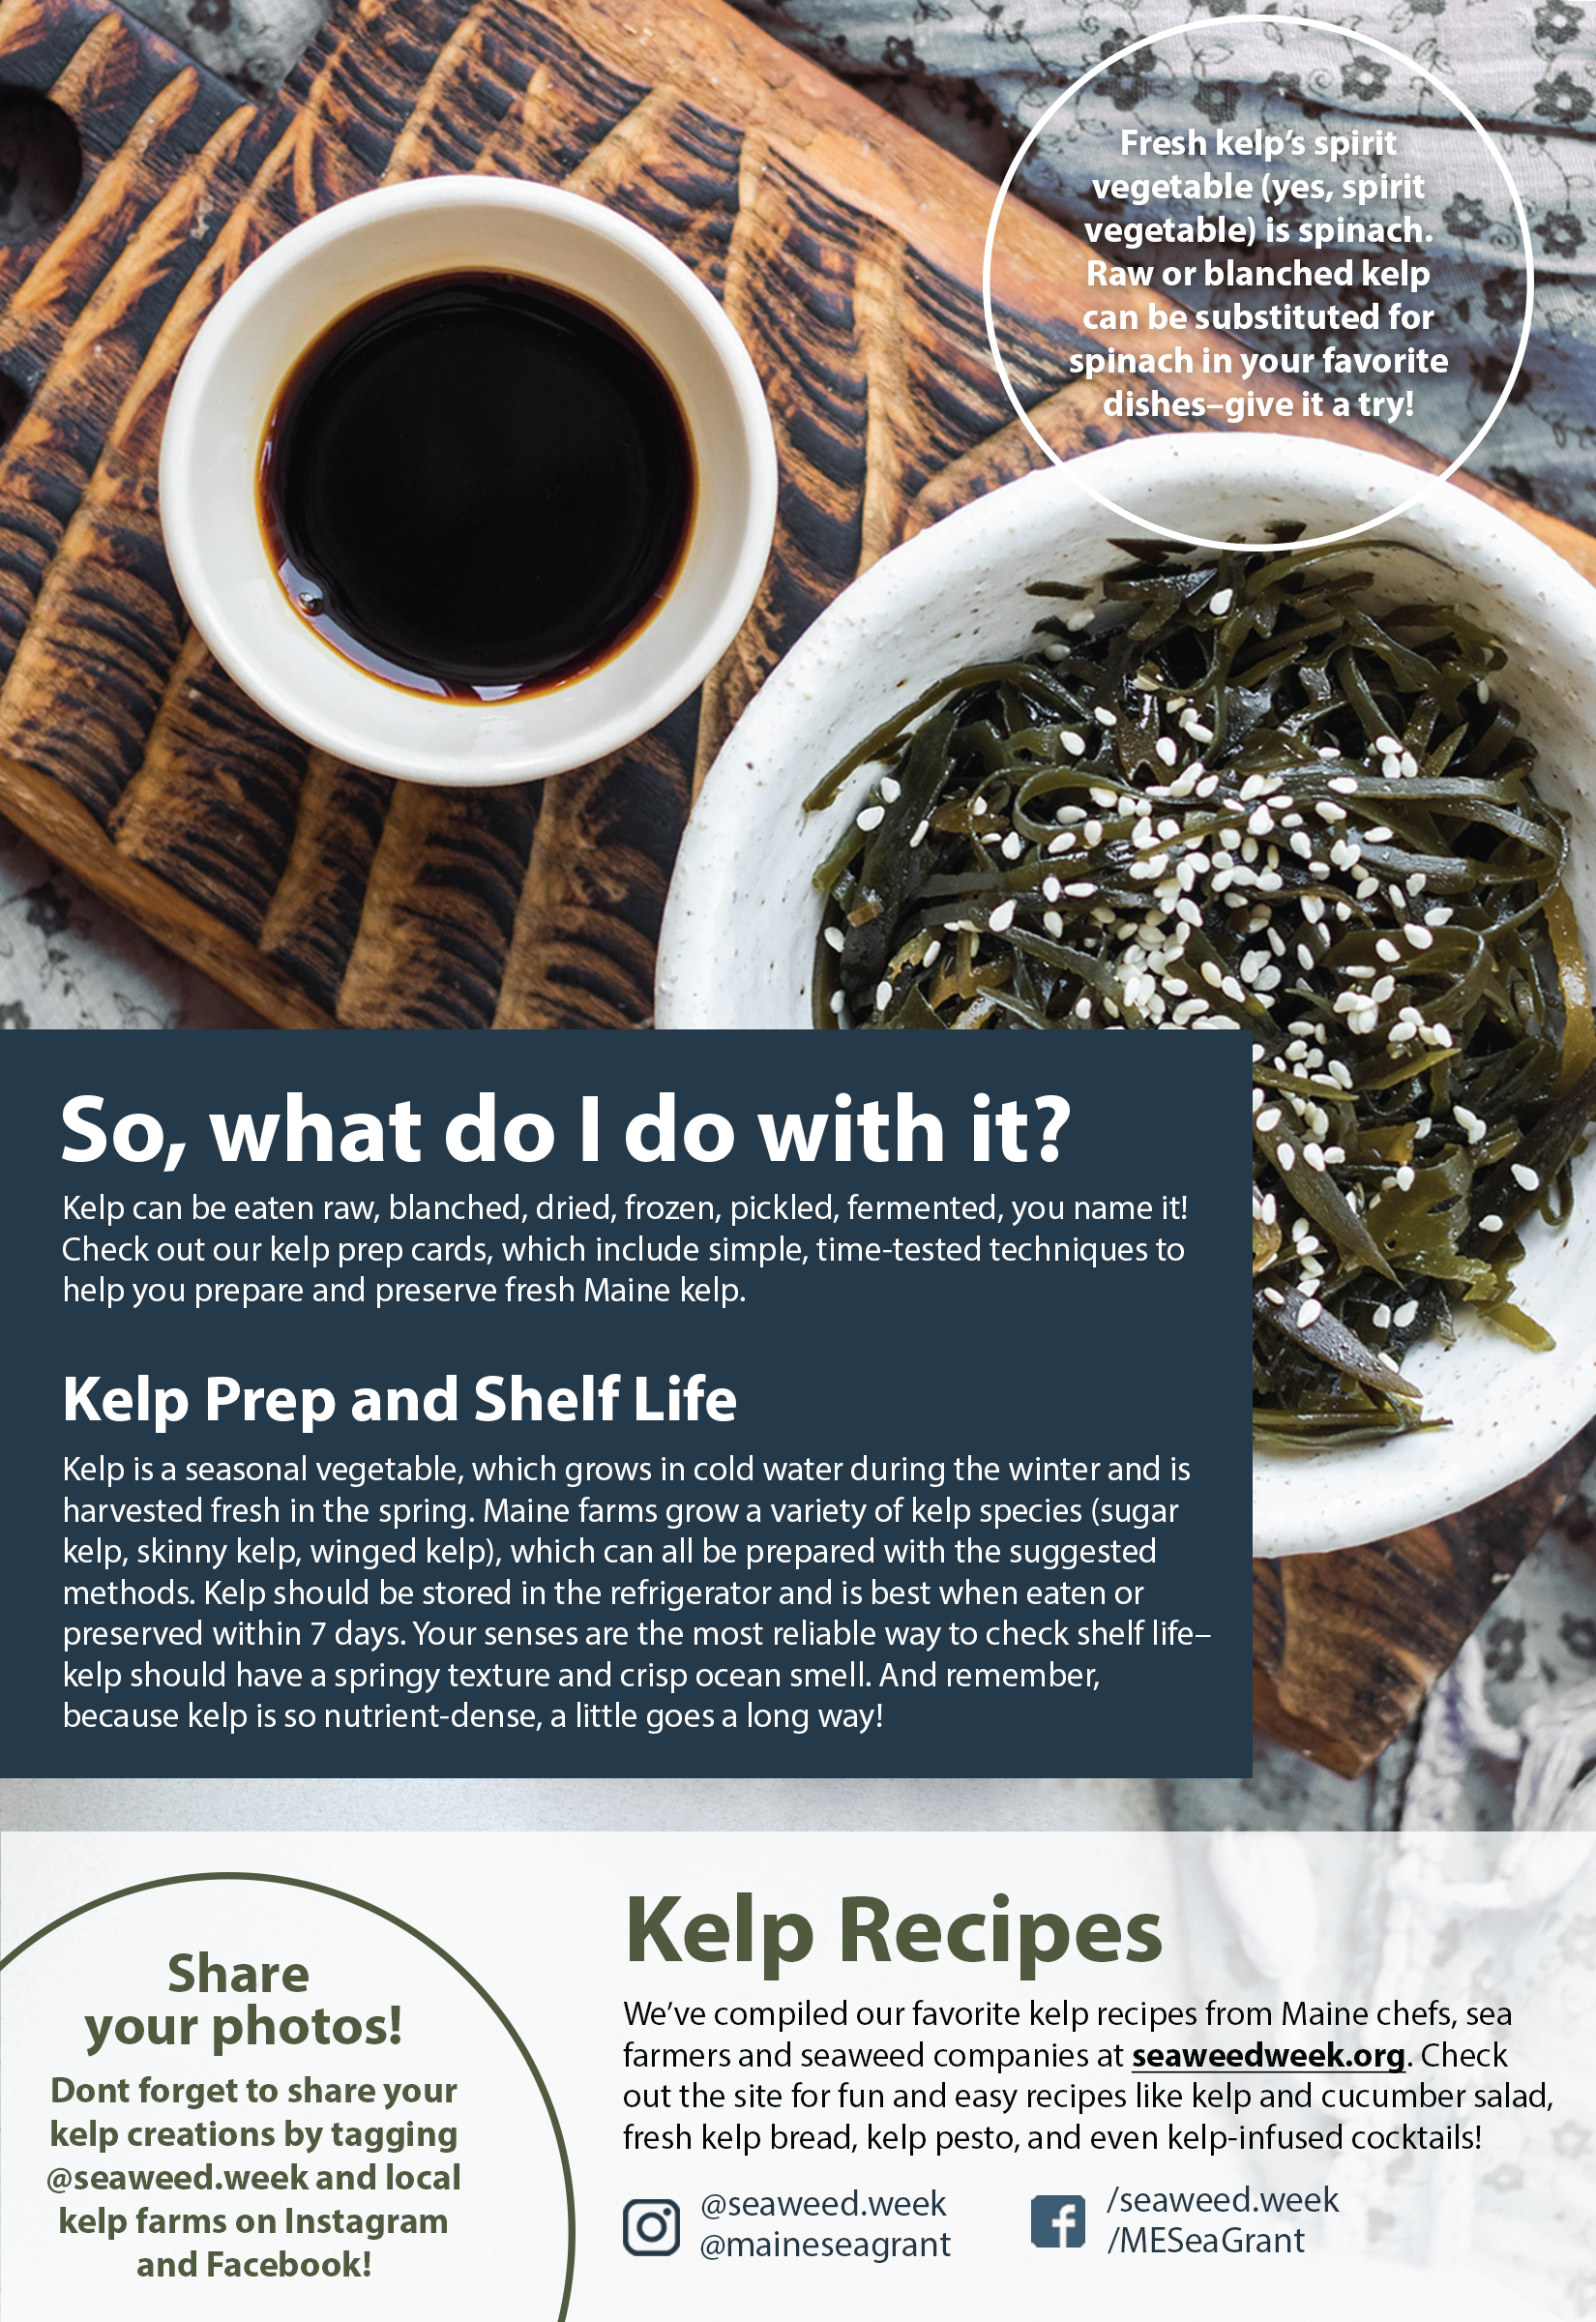 A photo of a bowl of seaweed salad and a smaller dish containing soy sauce on a wooden plant, with instructions about how to prepare and store kelp